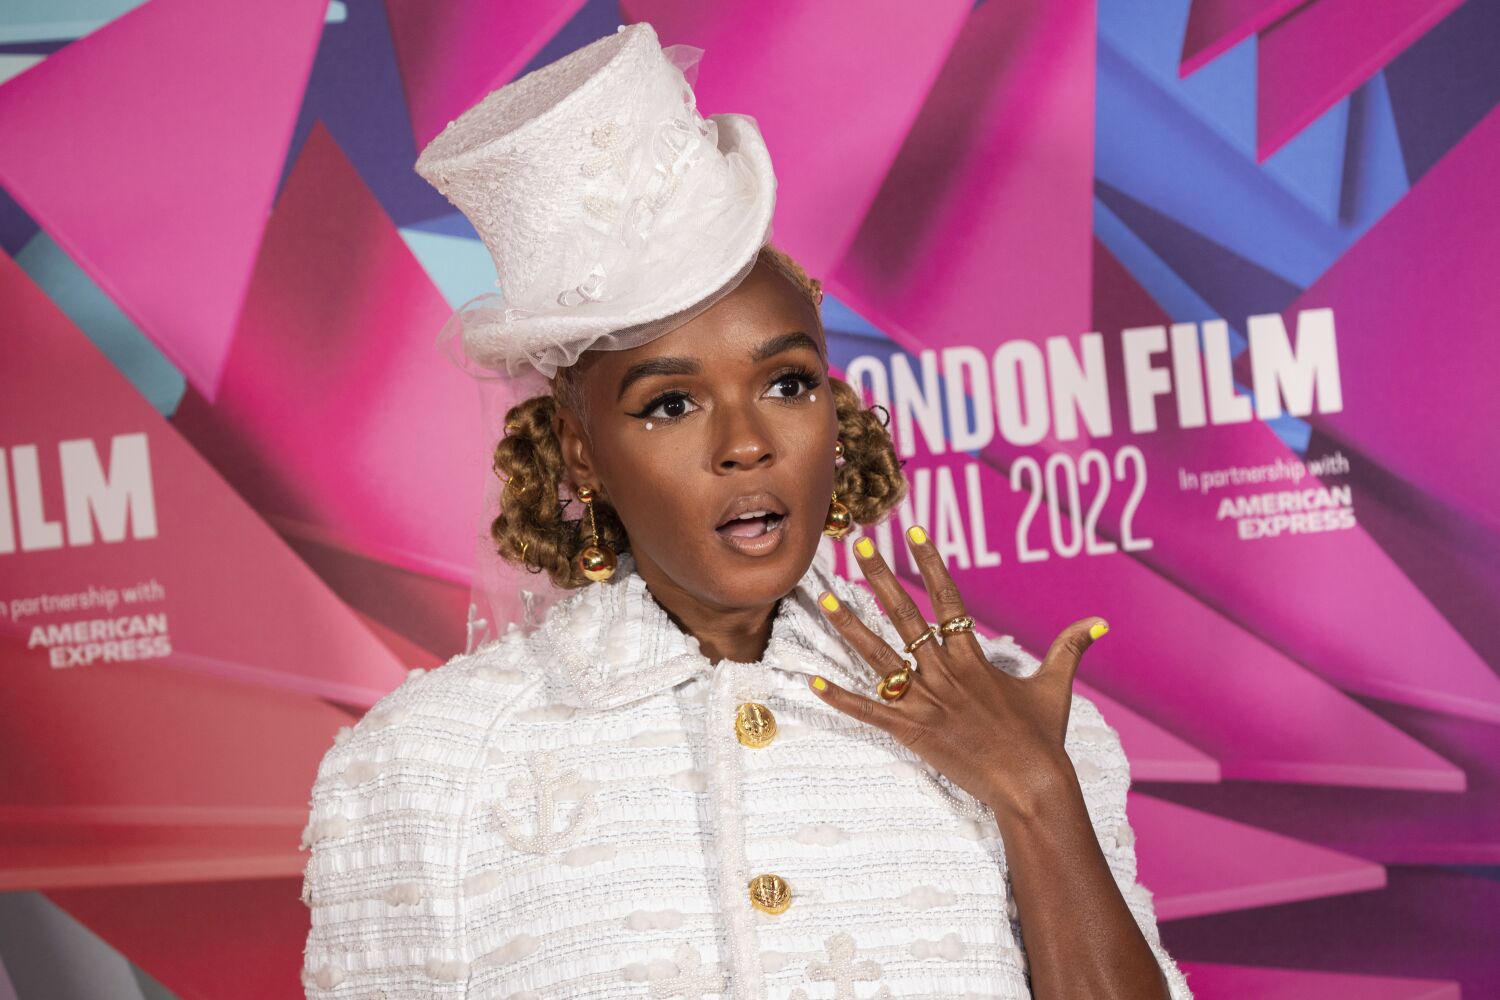 Janelle Monáe jokingly threatens to quit music after fan compares her to Monopoly Man